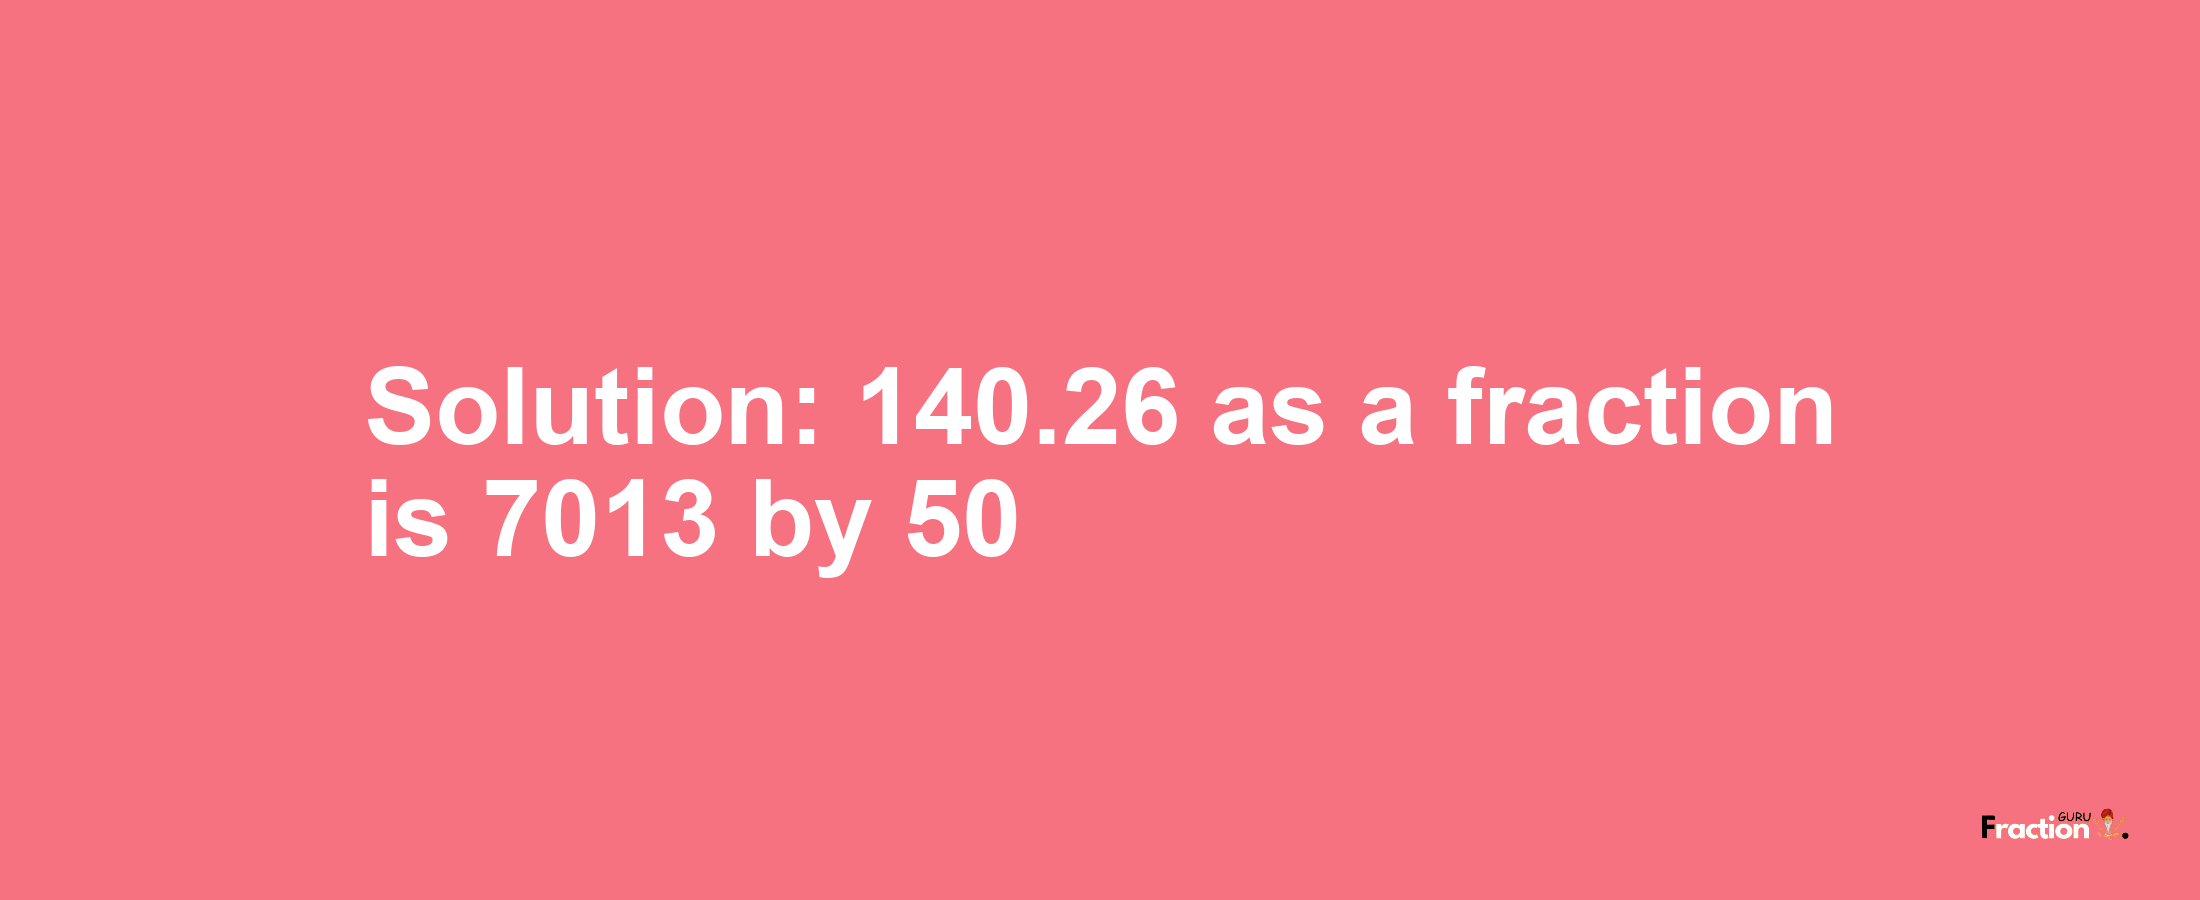 Solution:140.26 as a fraction is 7013/50